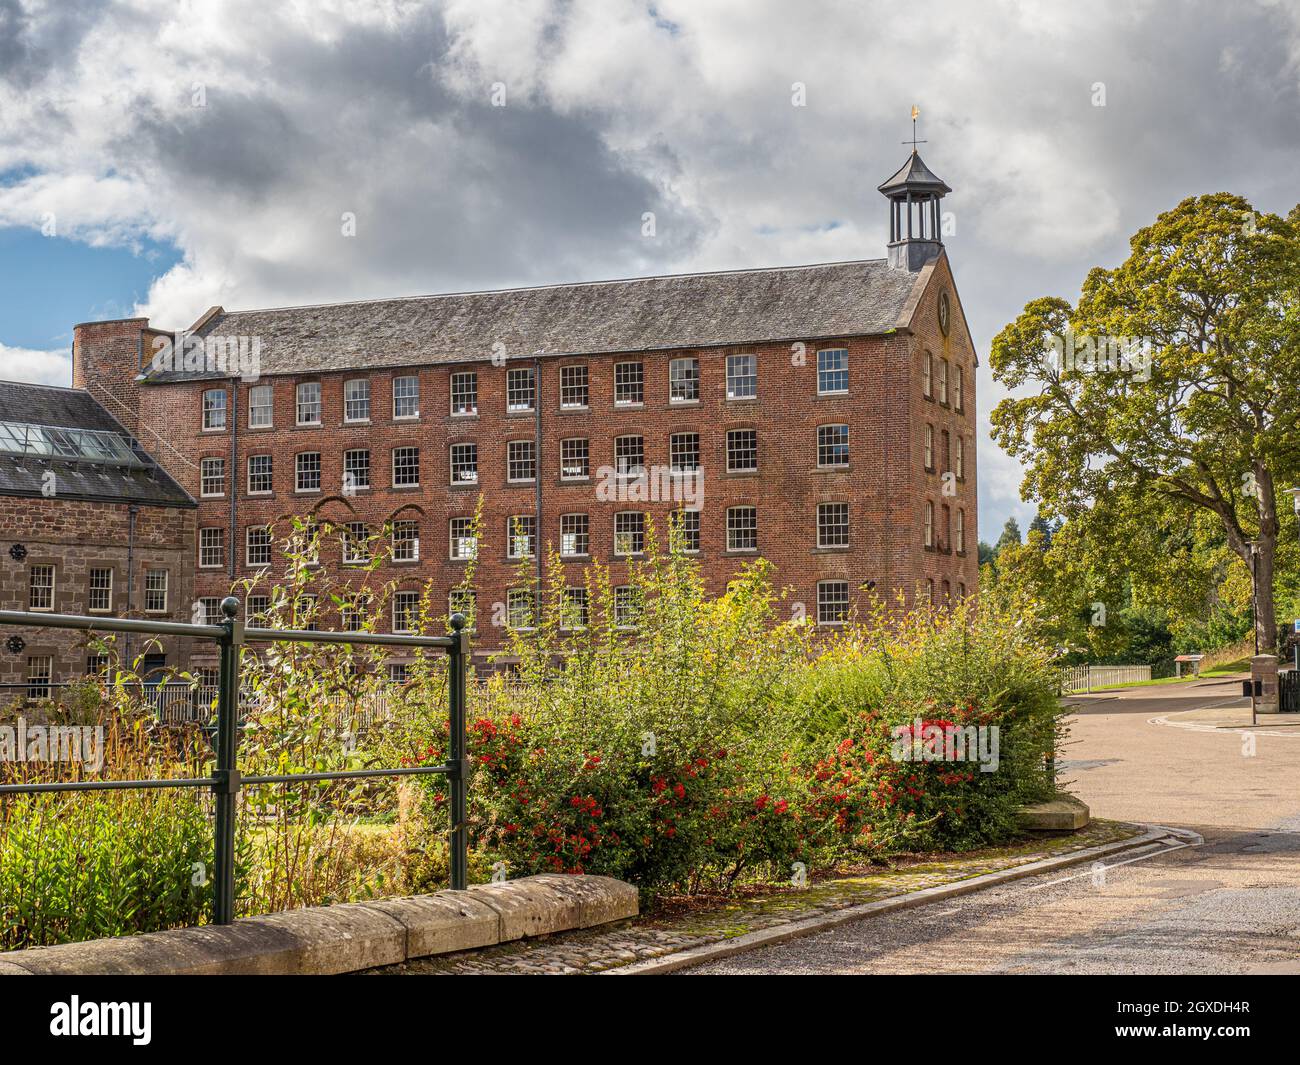 Stanley Mills, Perthshire, Scotland A historic water powered cotton mill on the banks of the River Tay Stock Photo